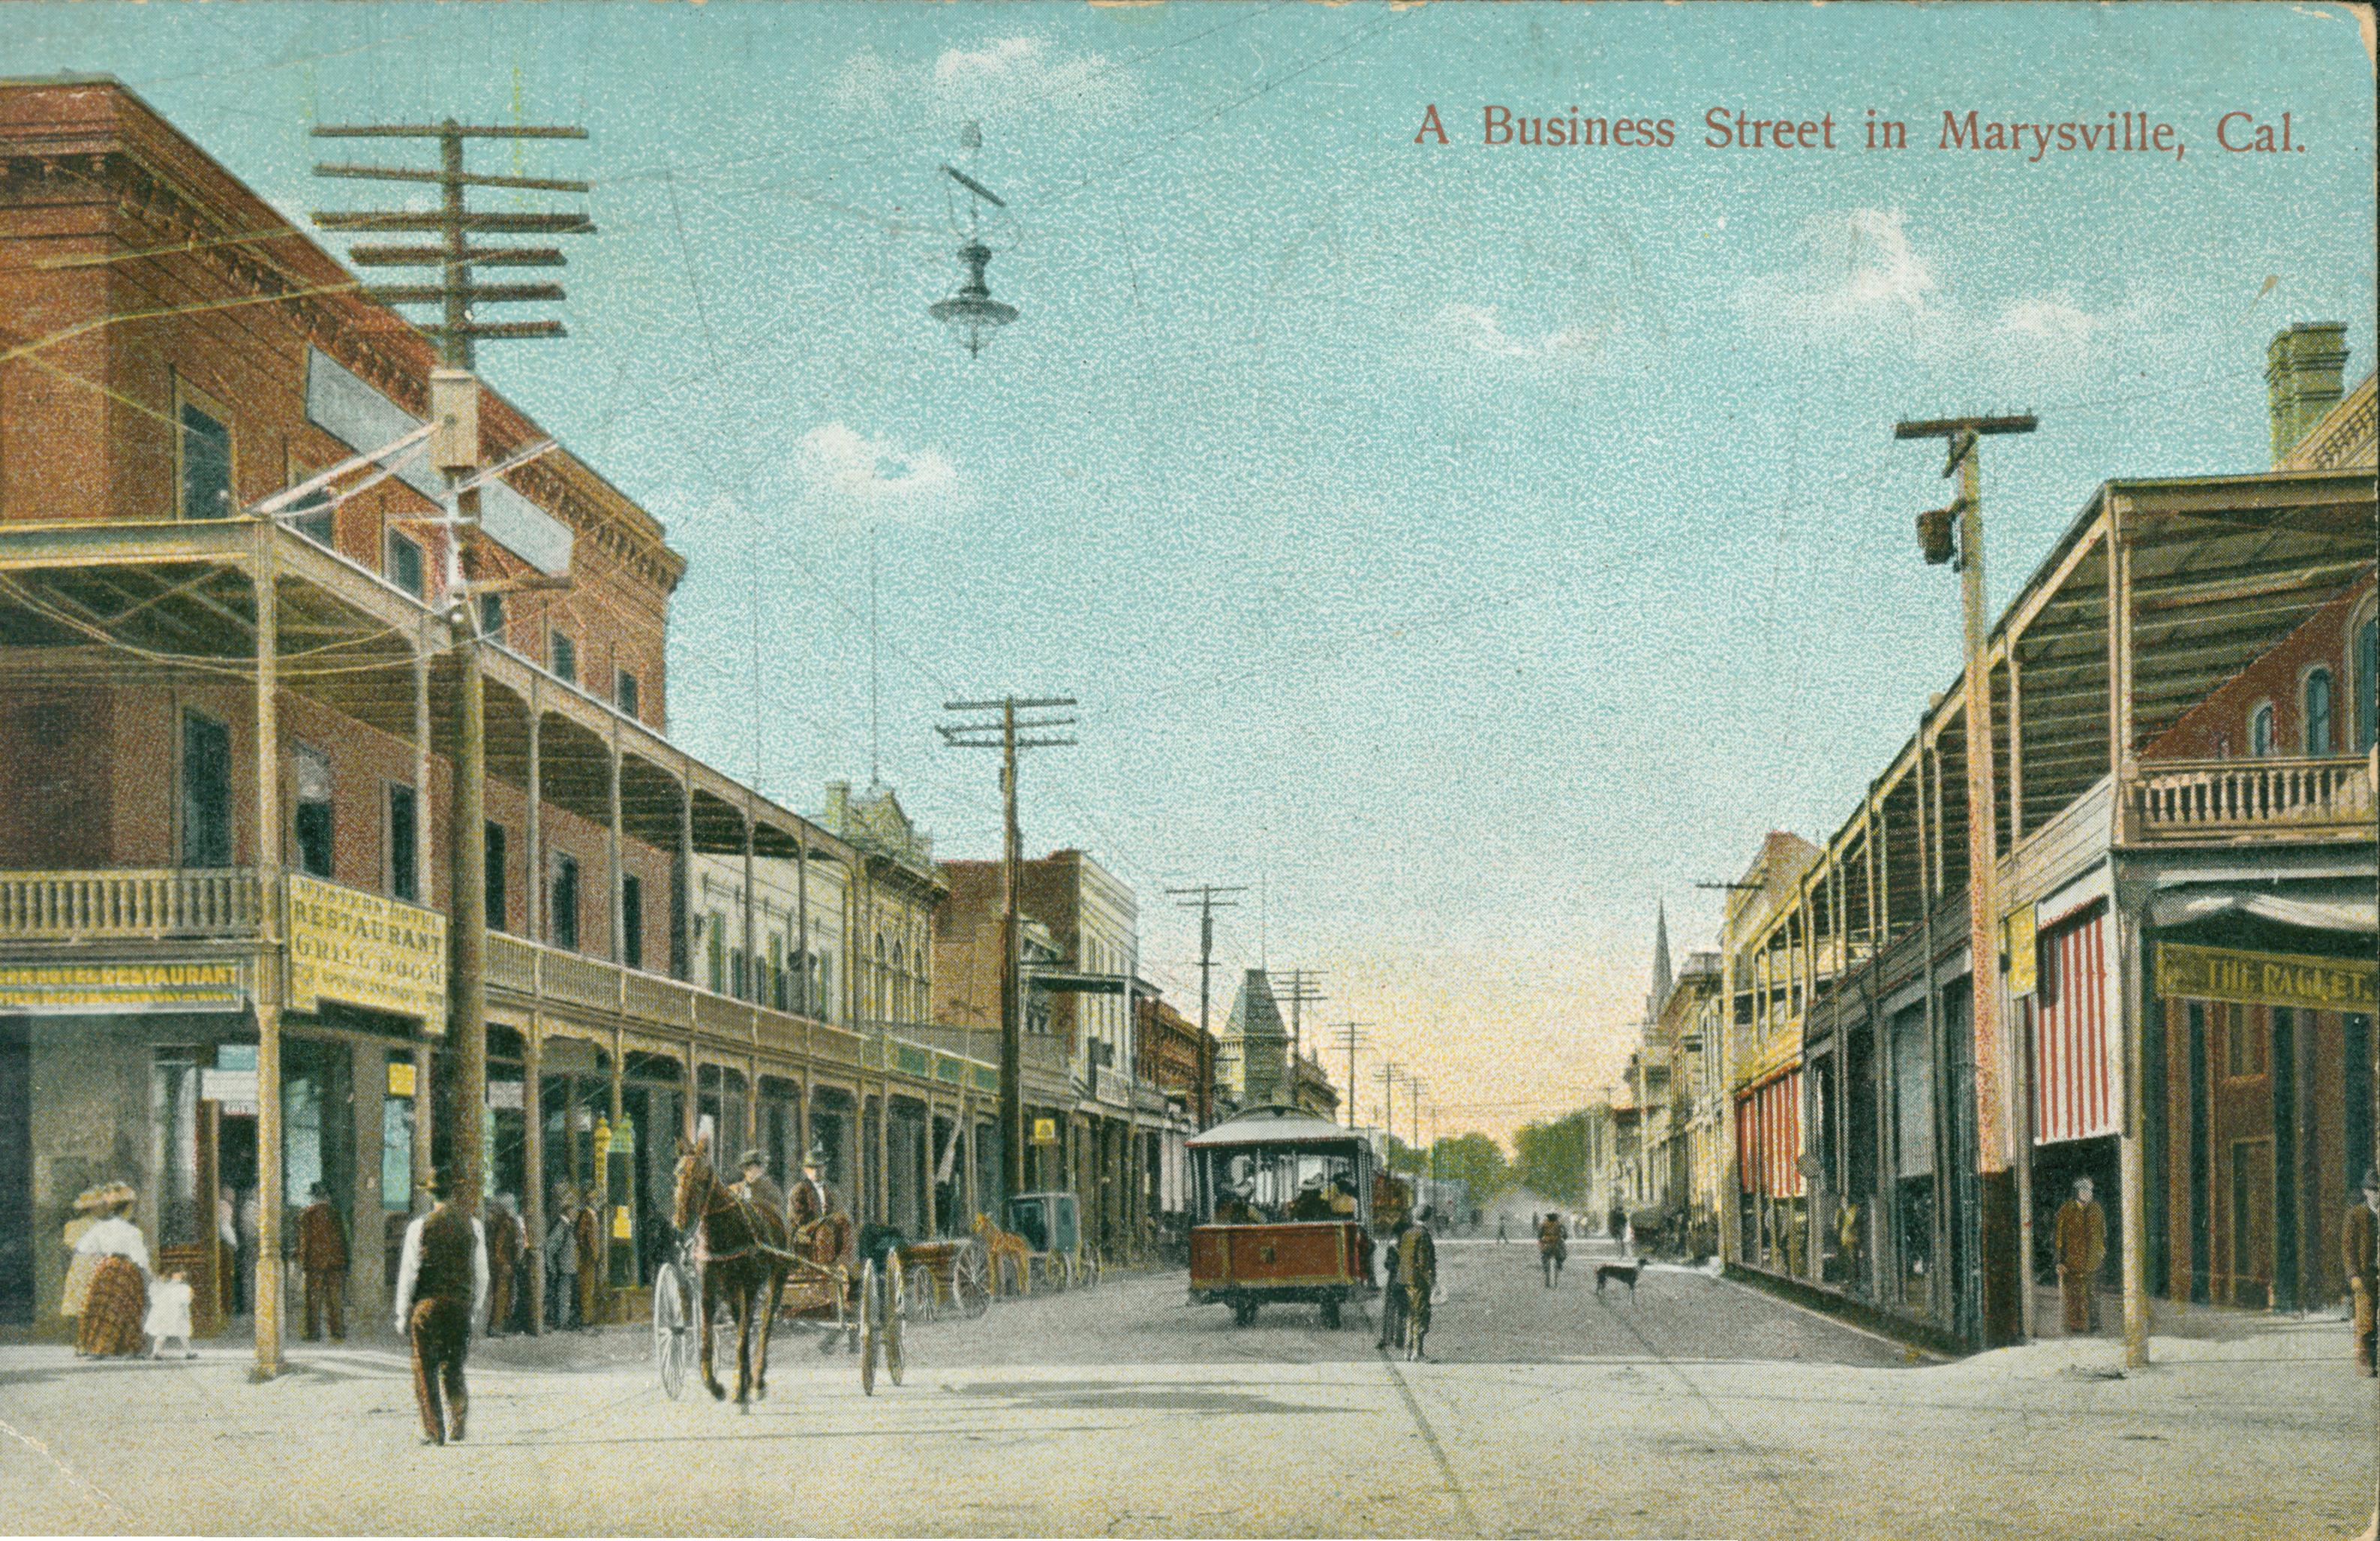 Shows a street in Marysville lined with buildings with a streetcar or trolley in the center of the road and a carriage off to the side.